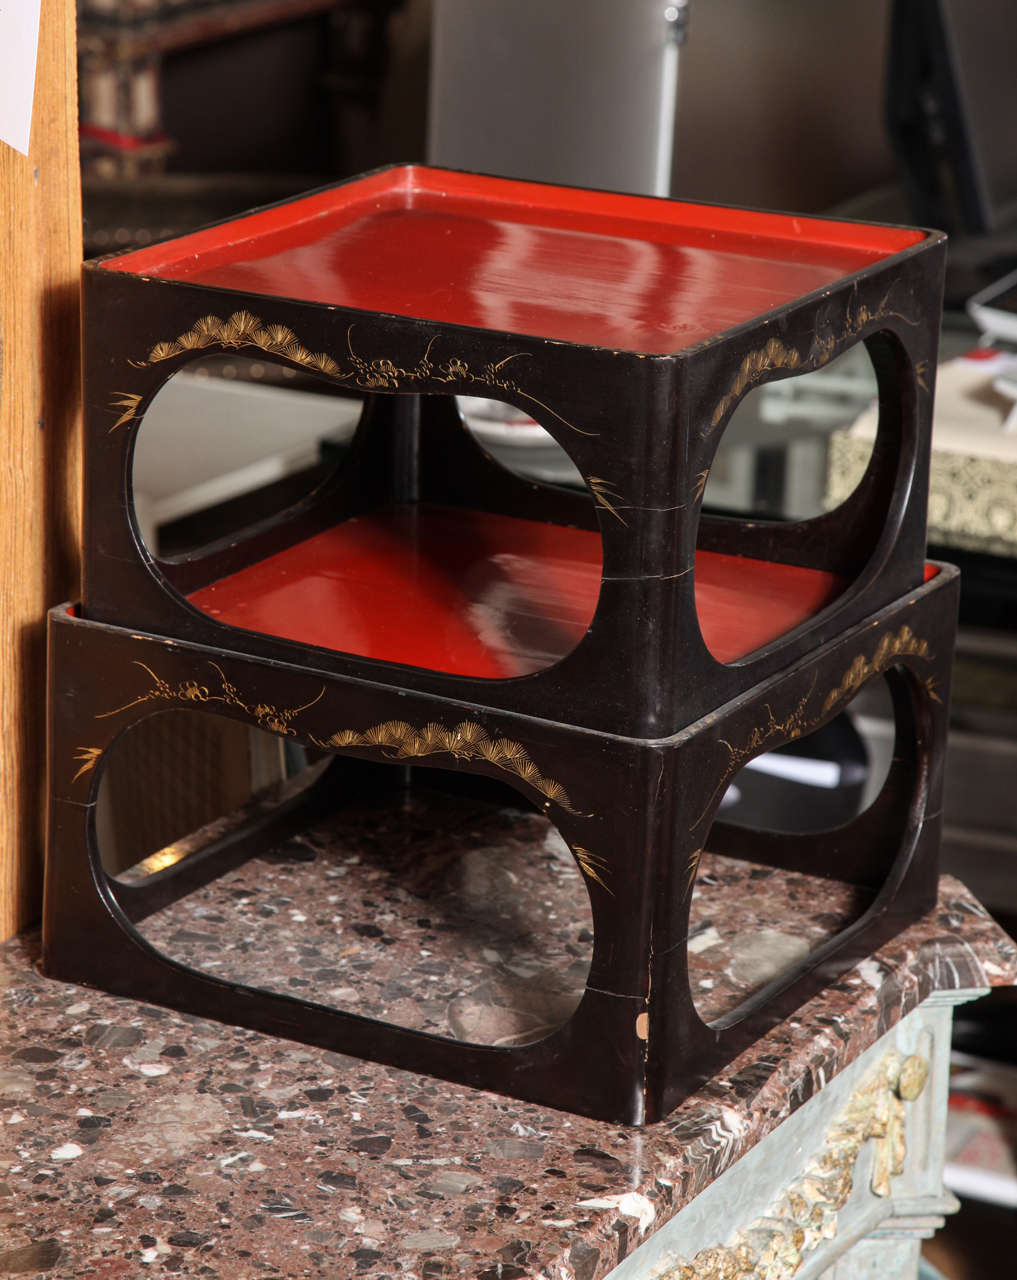 Wood A Set of Japanese Lacquer Nesting Tables, Late 19th/Early 20th Century For Sale